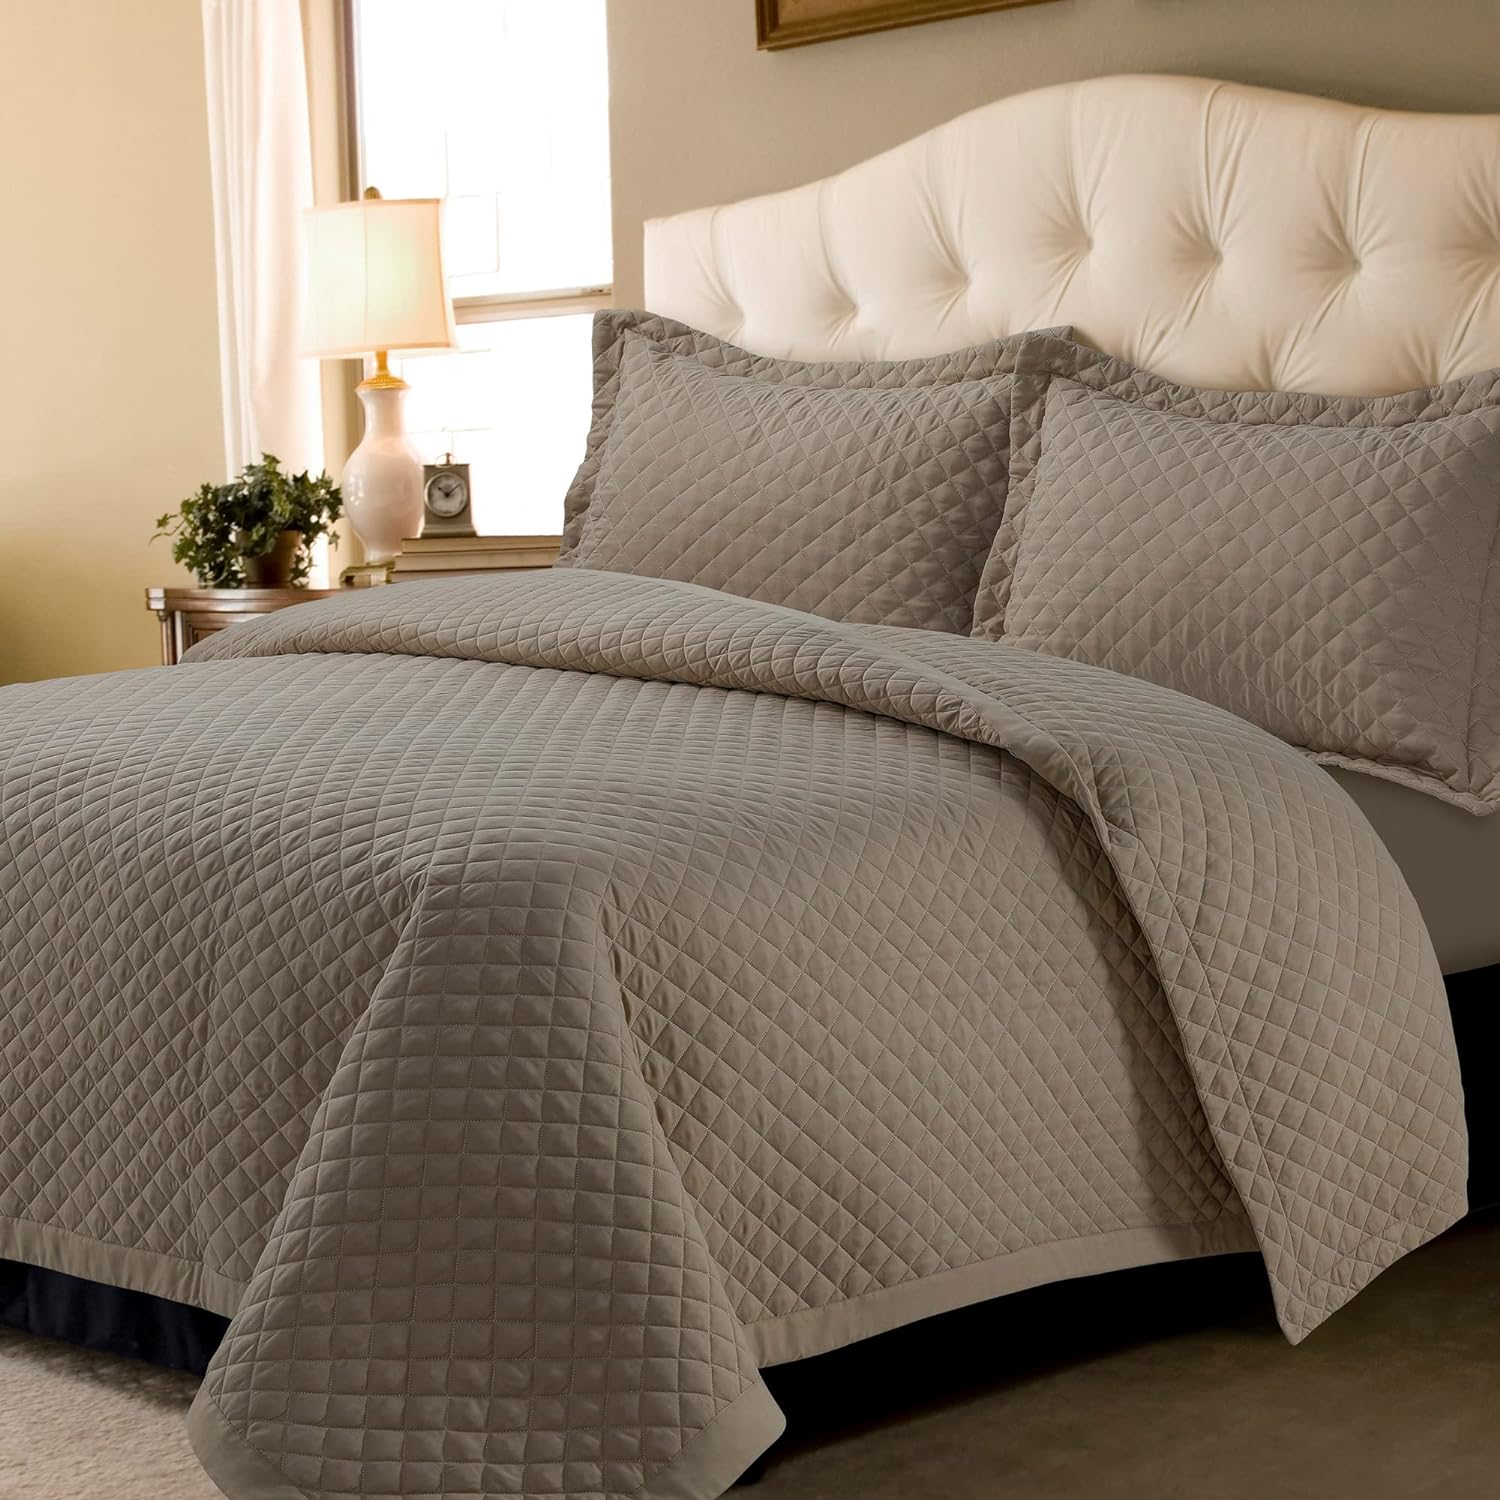 Tribeca Living Brisbane Oversized Twin Quilt Bedding Set, Solid 2-Piece Quilted Bedspread Coverlet with Matching Pillow Sham, Super Soft, Fade and Wrinkle Resistant Quilts, Taupe, (BRISQUILTTWTA)